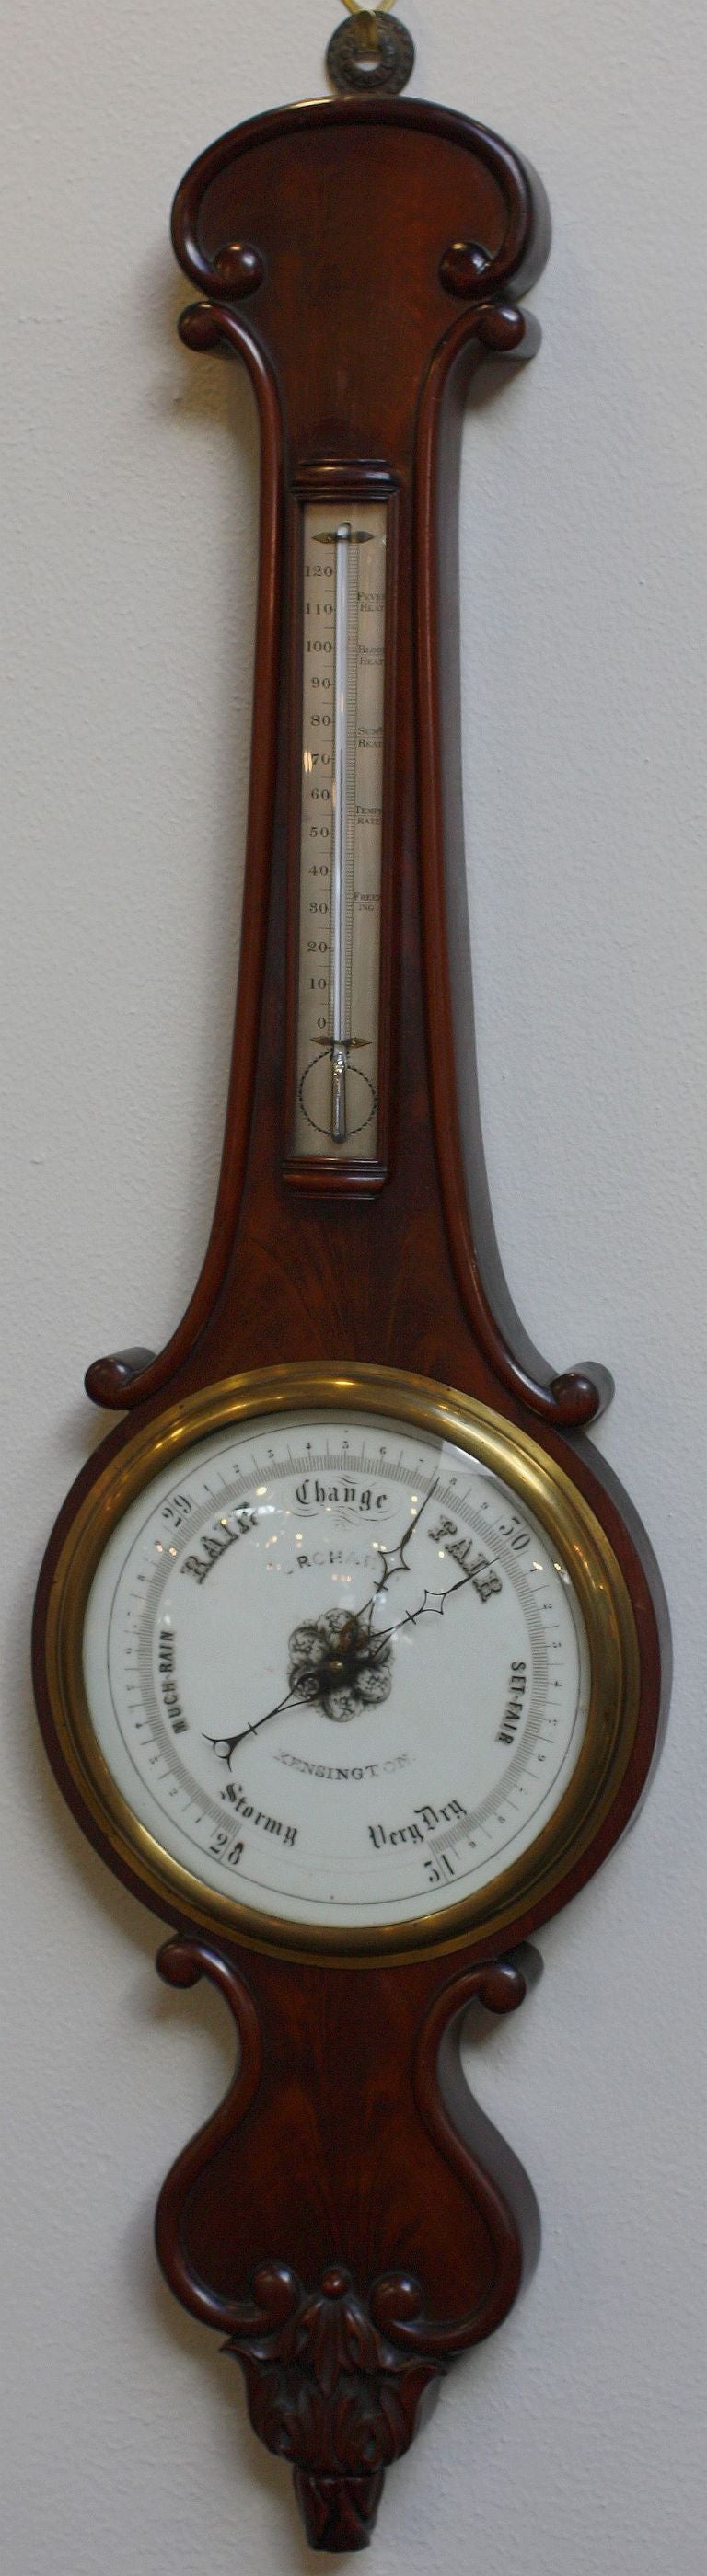 A working English banjo-shaped barometer of rosewood with porcelain dial and mercury thermometer by John Orchard, Kensington, with rare turn-nob dial set on case bottom 

J. Orchard, Kensington mentioned in The Official Descriptive and Illustrated